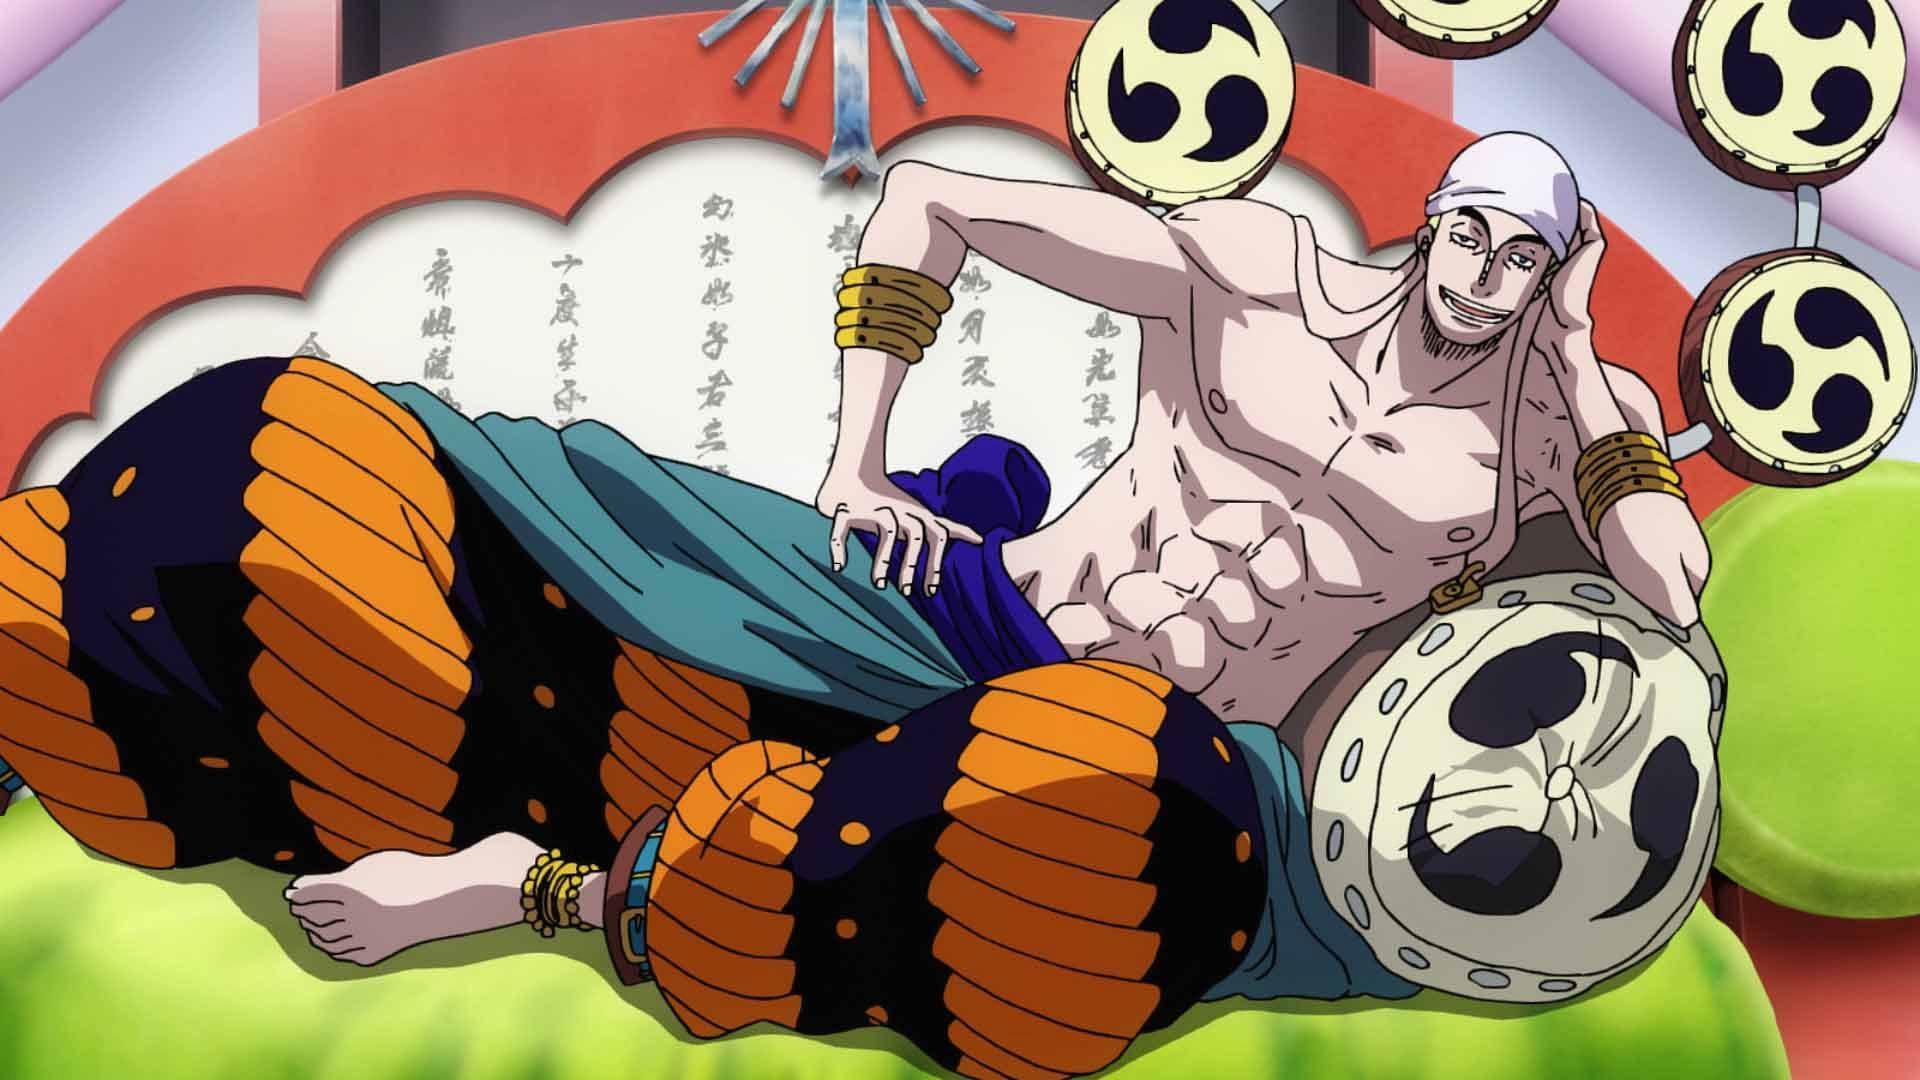 Enel as seen in One Piece (Image via Toei Animation)